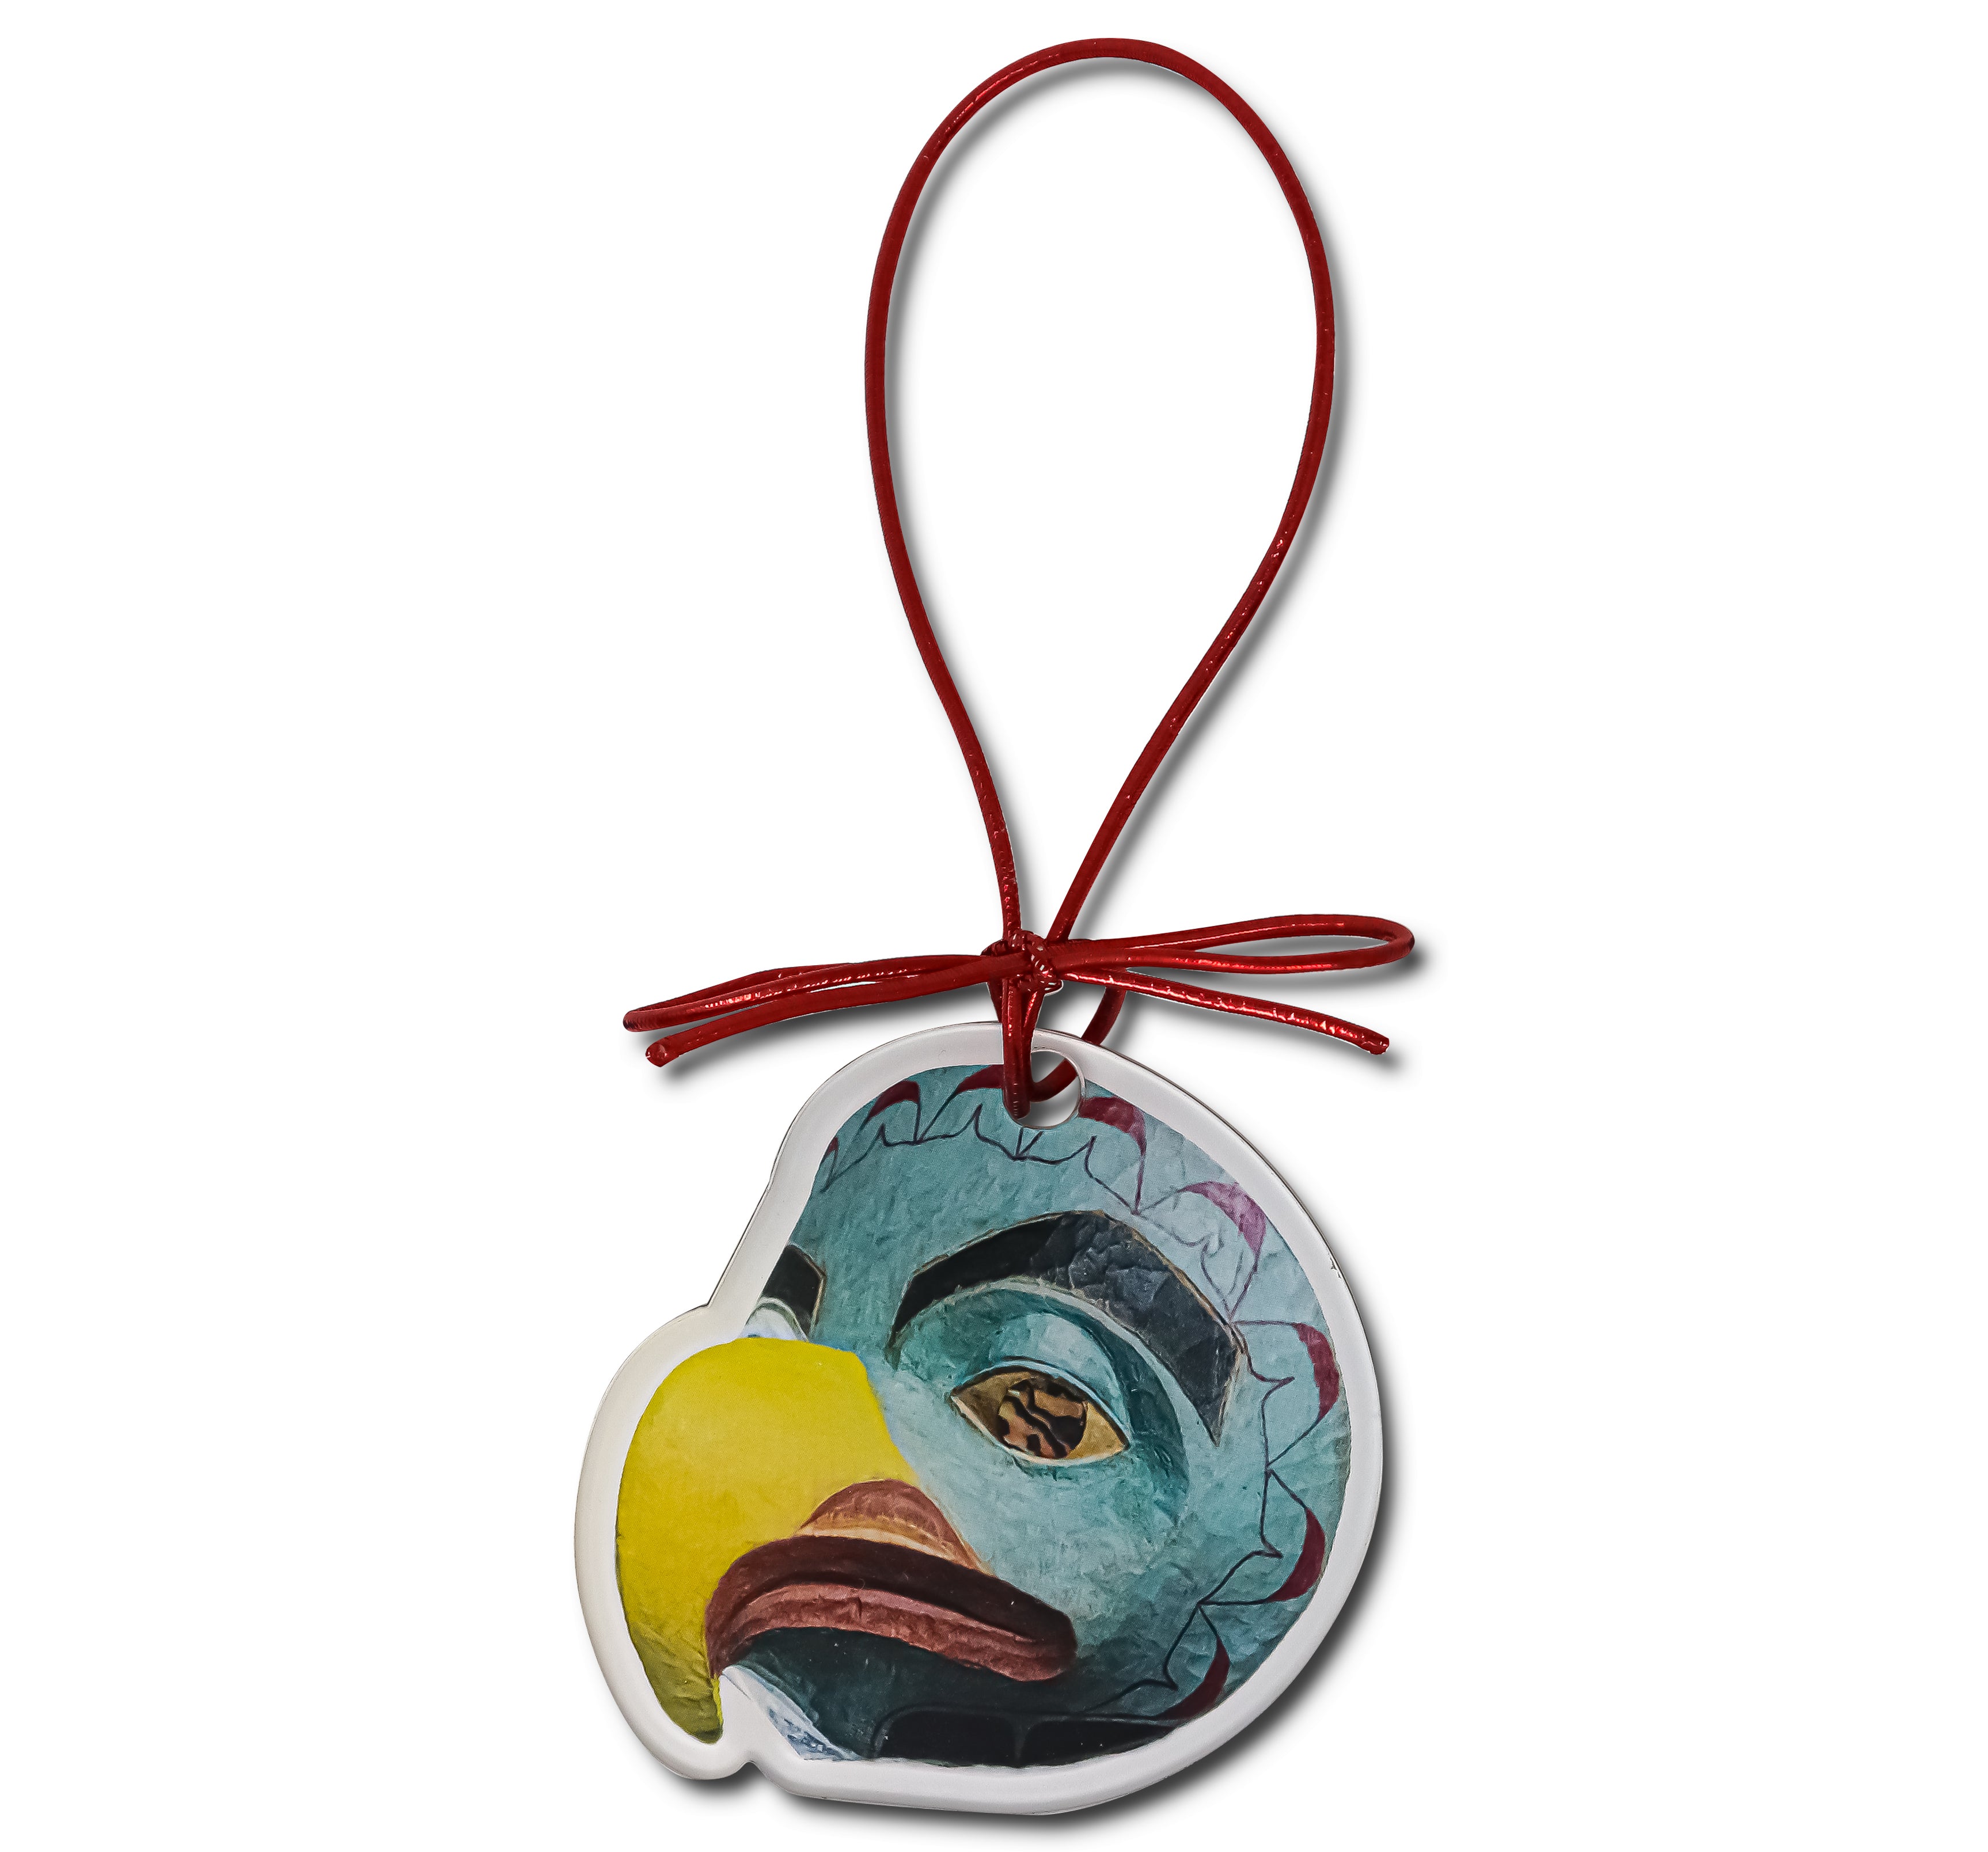 Alaskan Native Eagle Mask Acrylic Holiday Tree Ornament originally carved and painted by Fred Fulmer Tlingit Artist